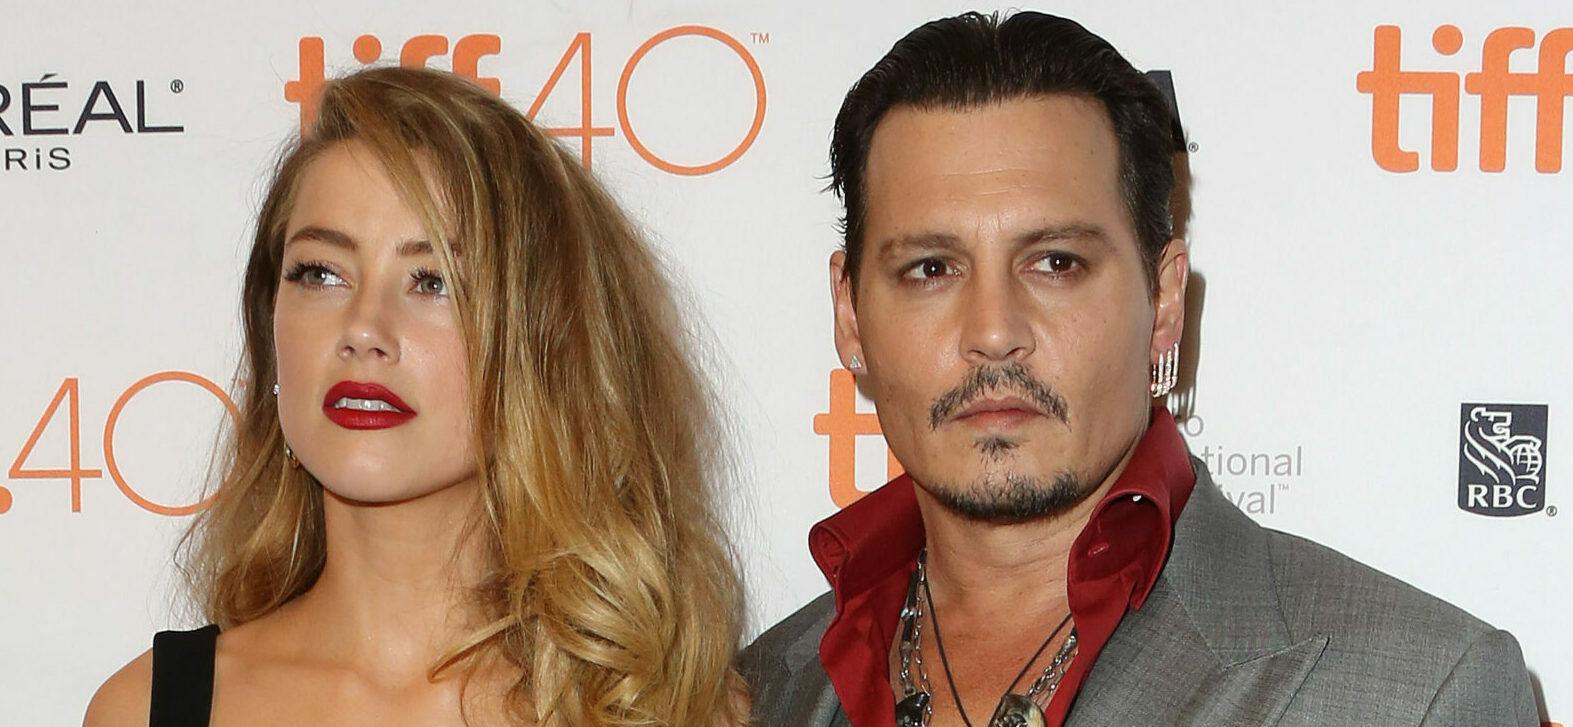 Amber Heard Spotted With A New Flame In Spain After Johnny Depp Trial